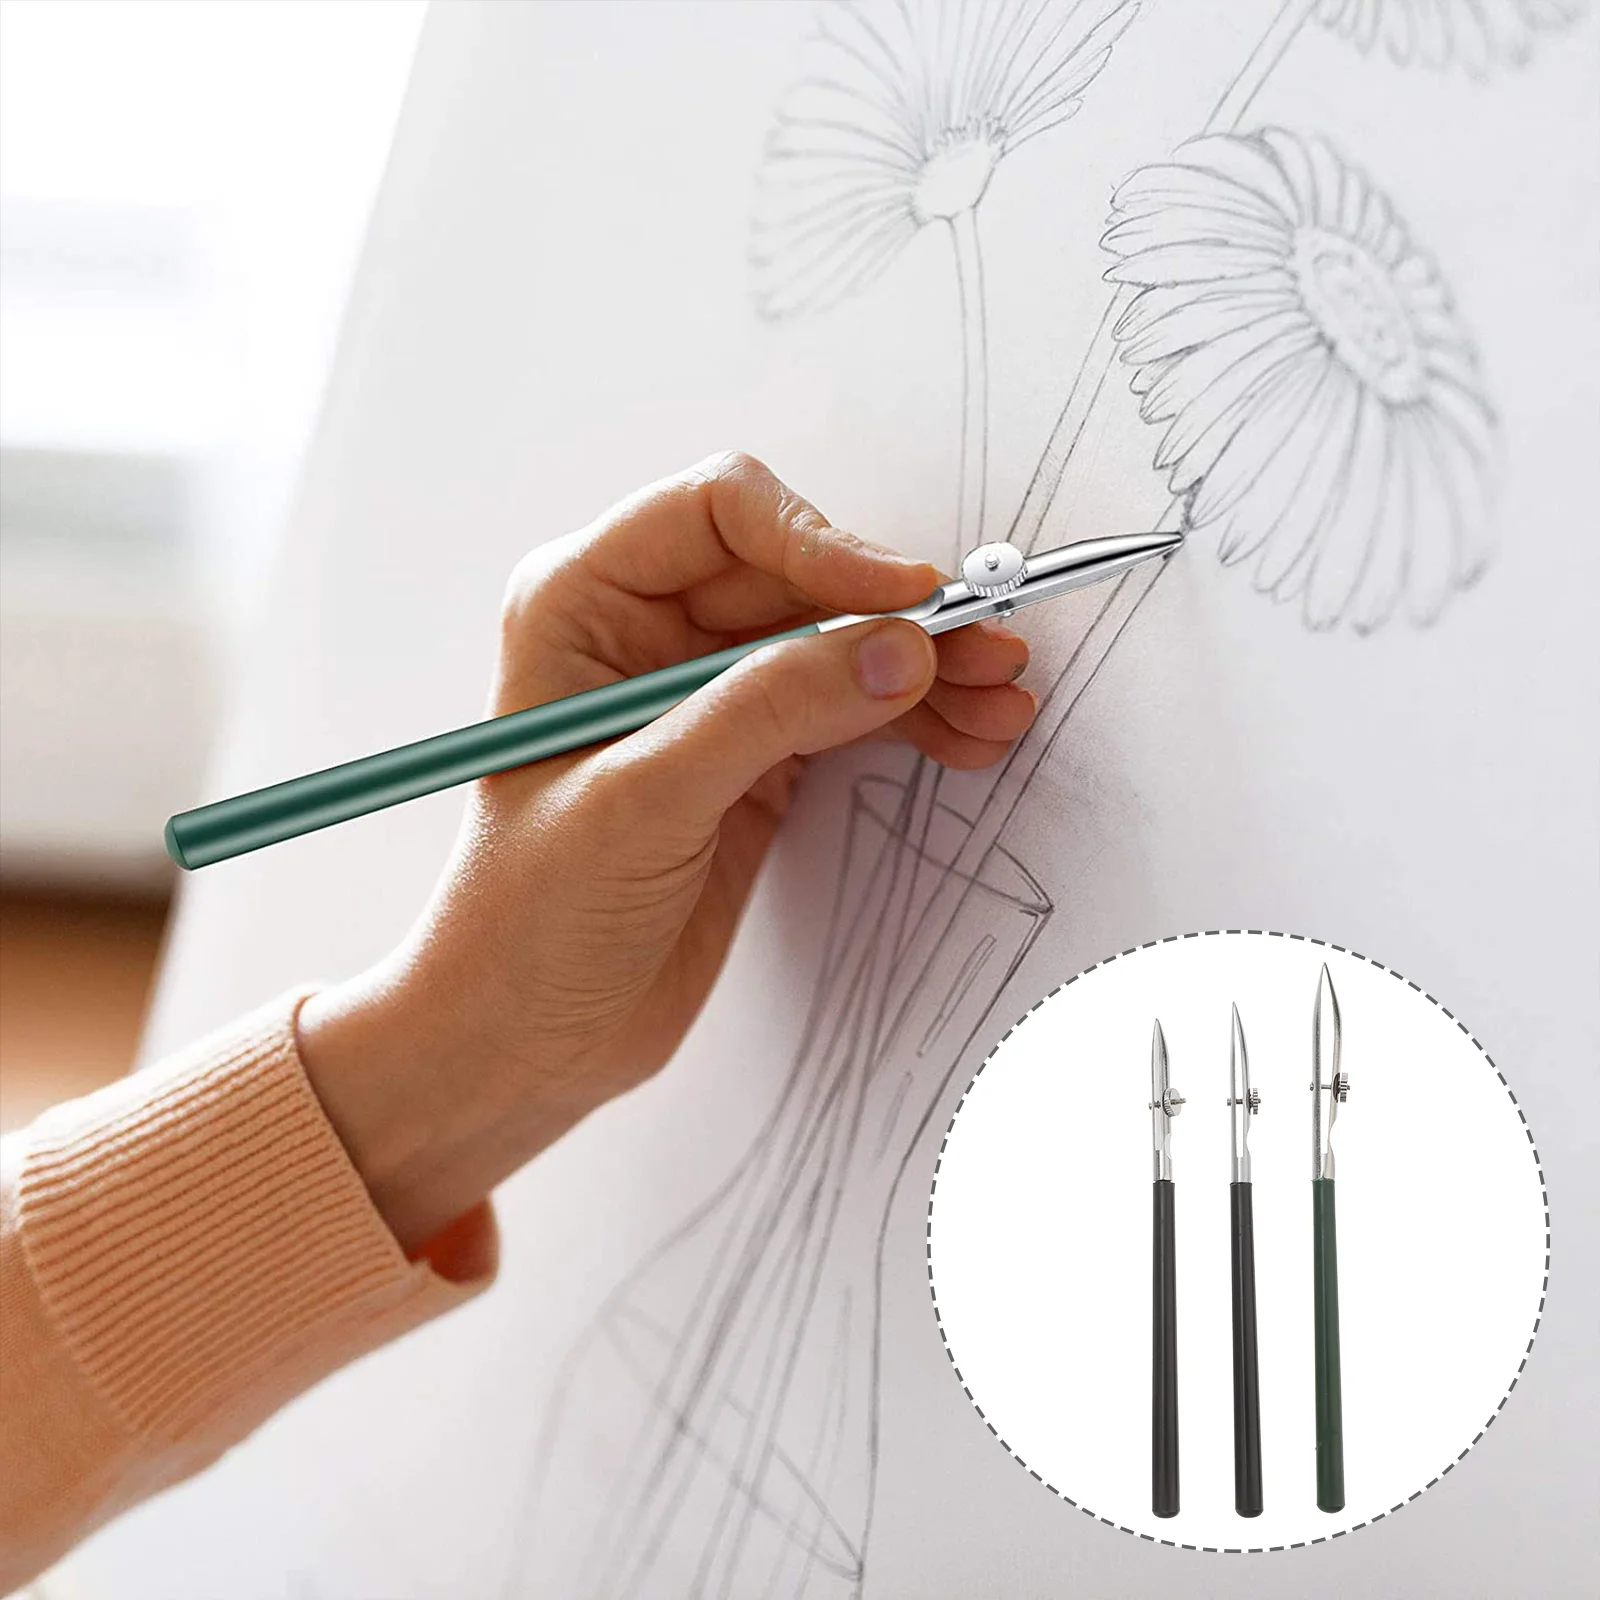 

Adjustable Straight Line Pen Art Ruling Pen Drawing Tool for Masking Fluid Fine LinesSize L,Size M, Size S for Each One